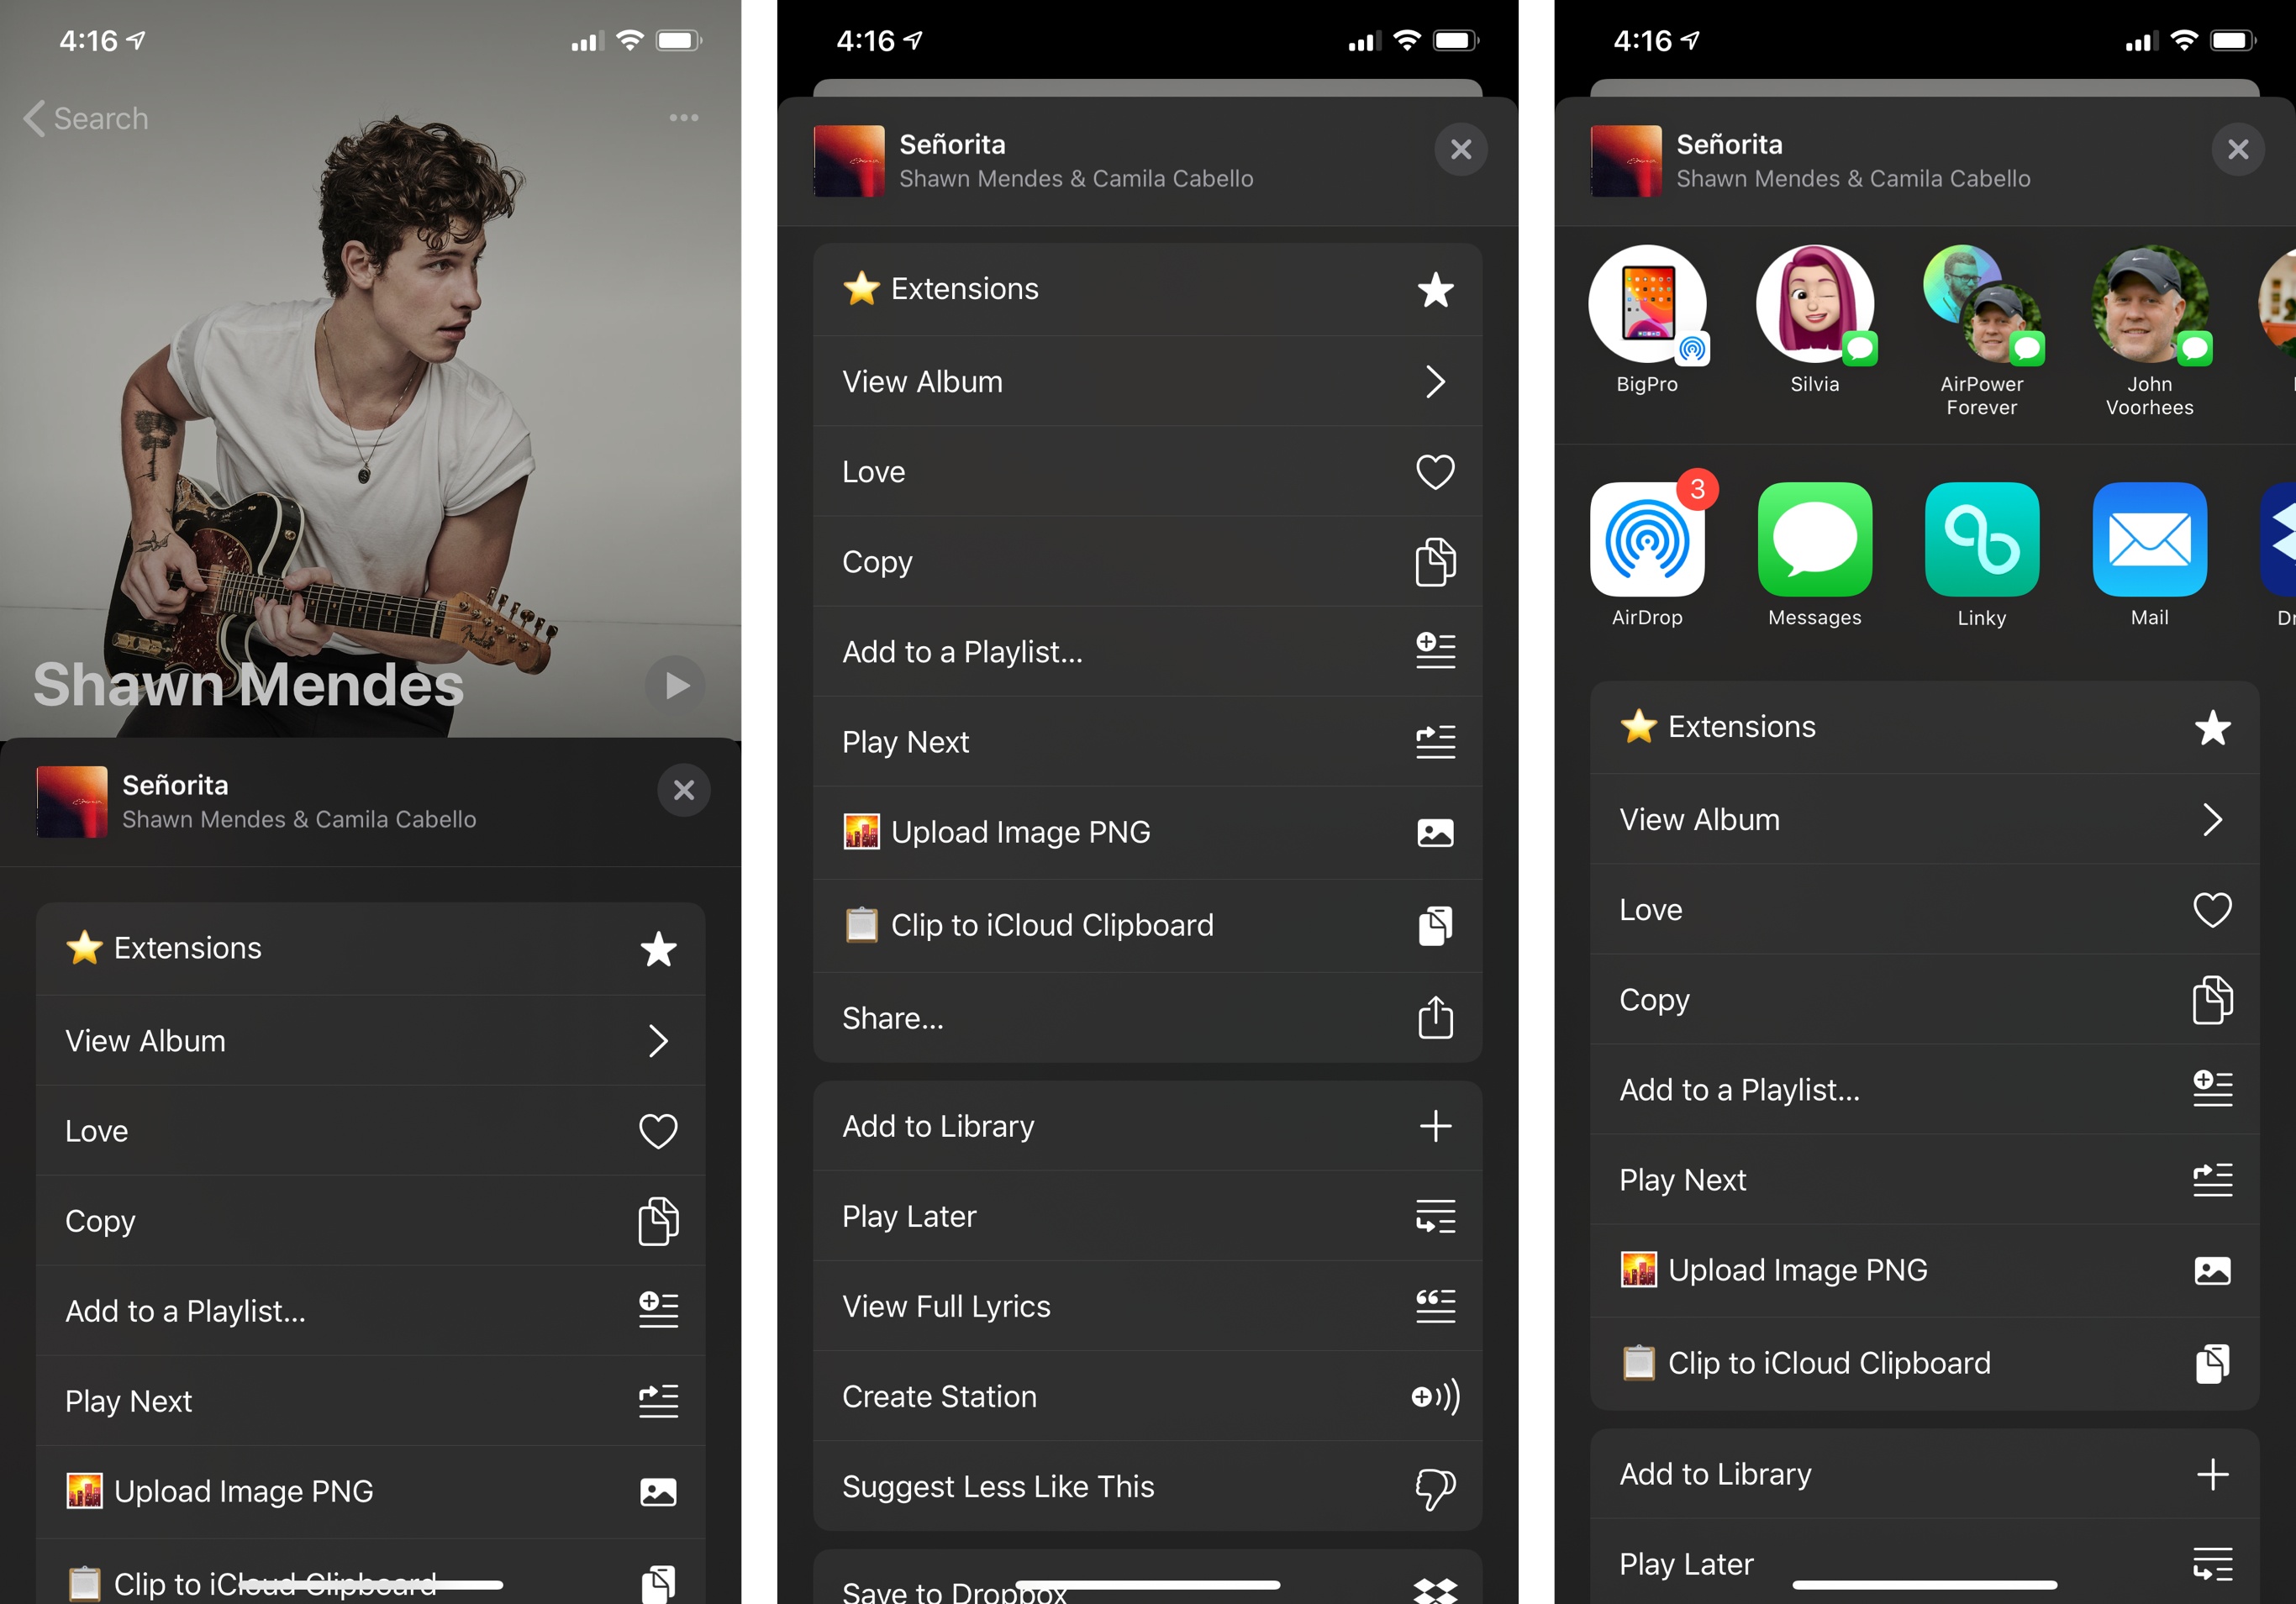 The full share sheet, as in other apps, contains both Music-specific actions and shortcuts.